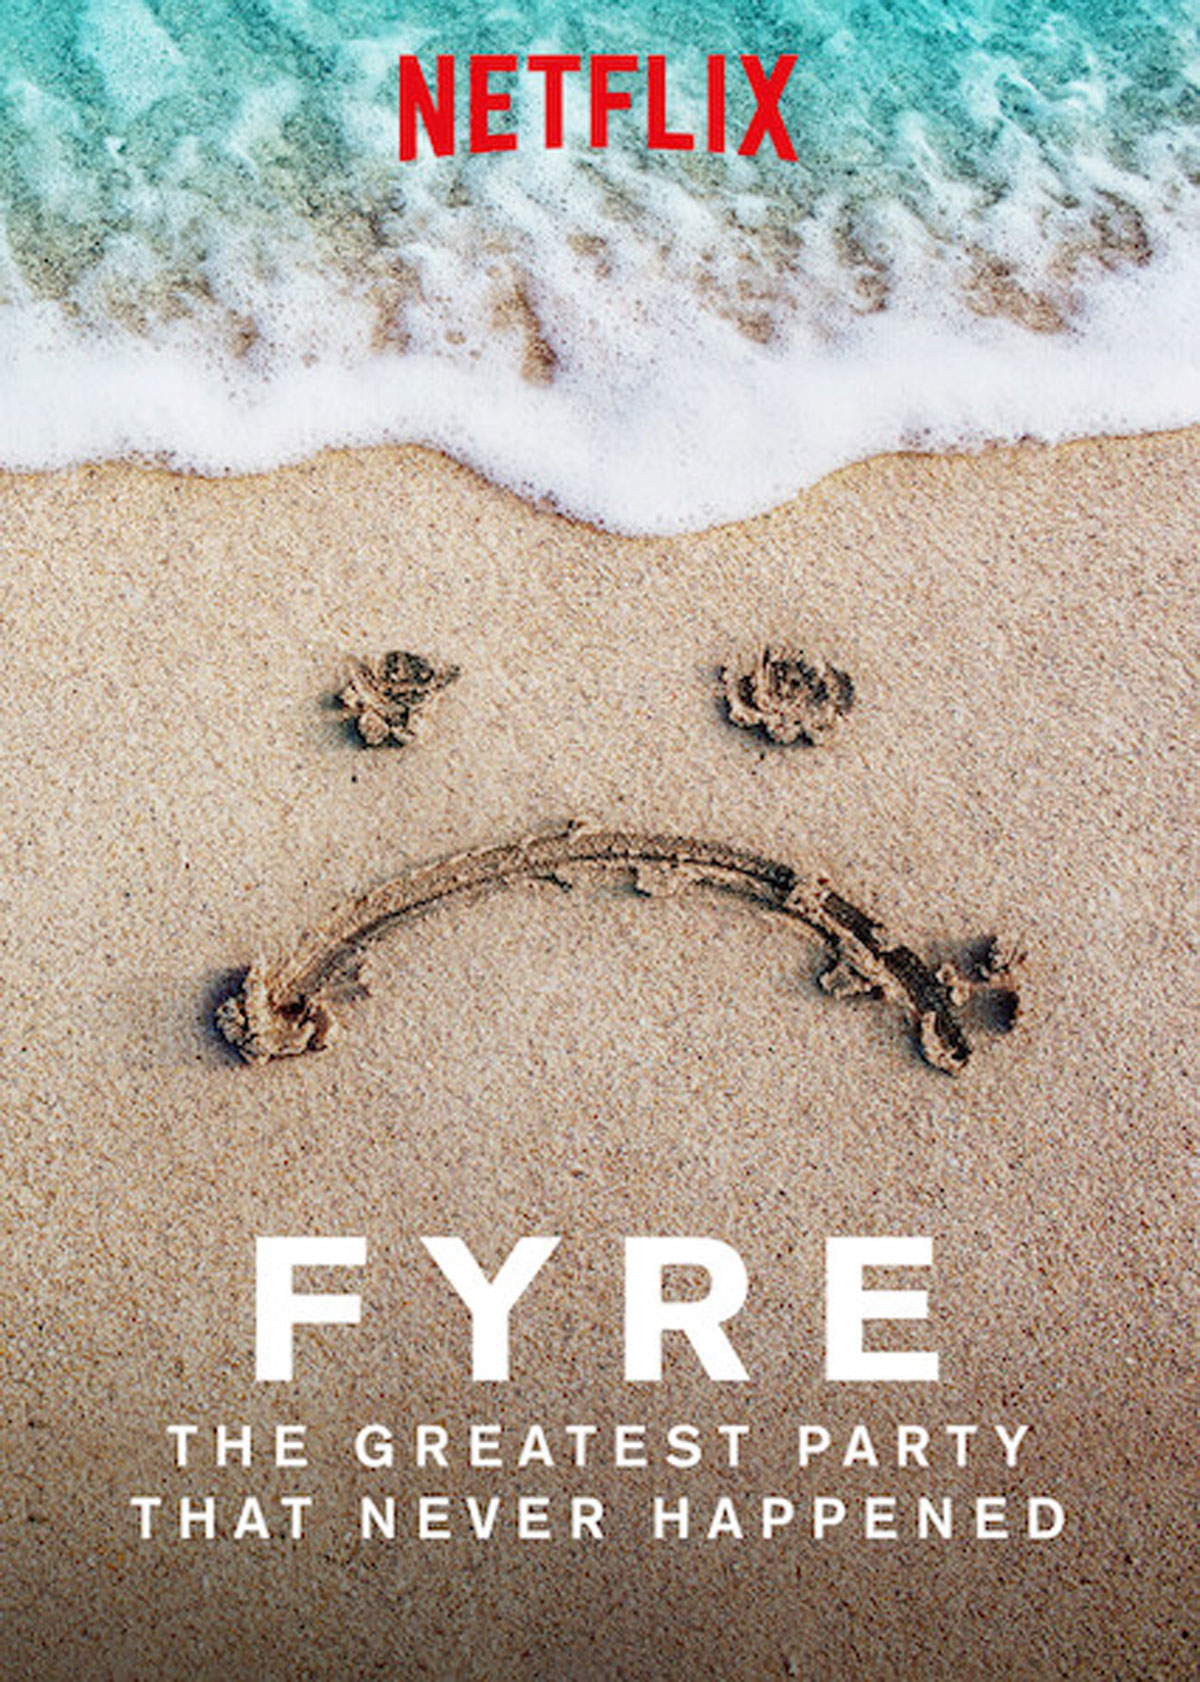 FYRE- The Greatest Party That Never Happened - documentaire marketing